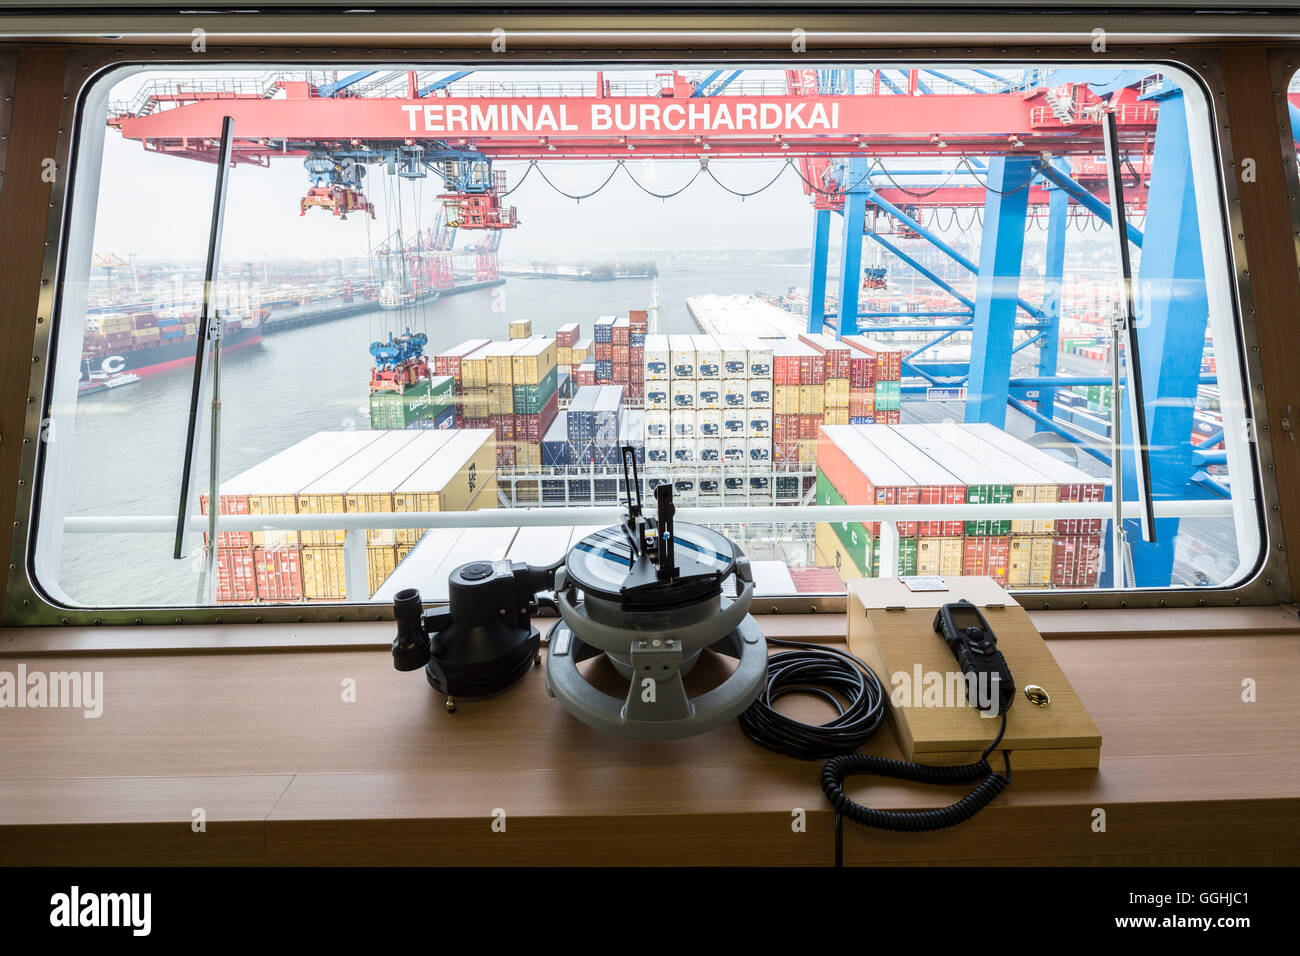 View from the ship's bridge of the bug from the CMA CGM Marco Polo in the  Container Terminal Burchardkai, Hamburg, Germany Stock Photo - Alamy